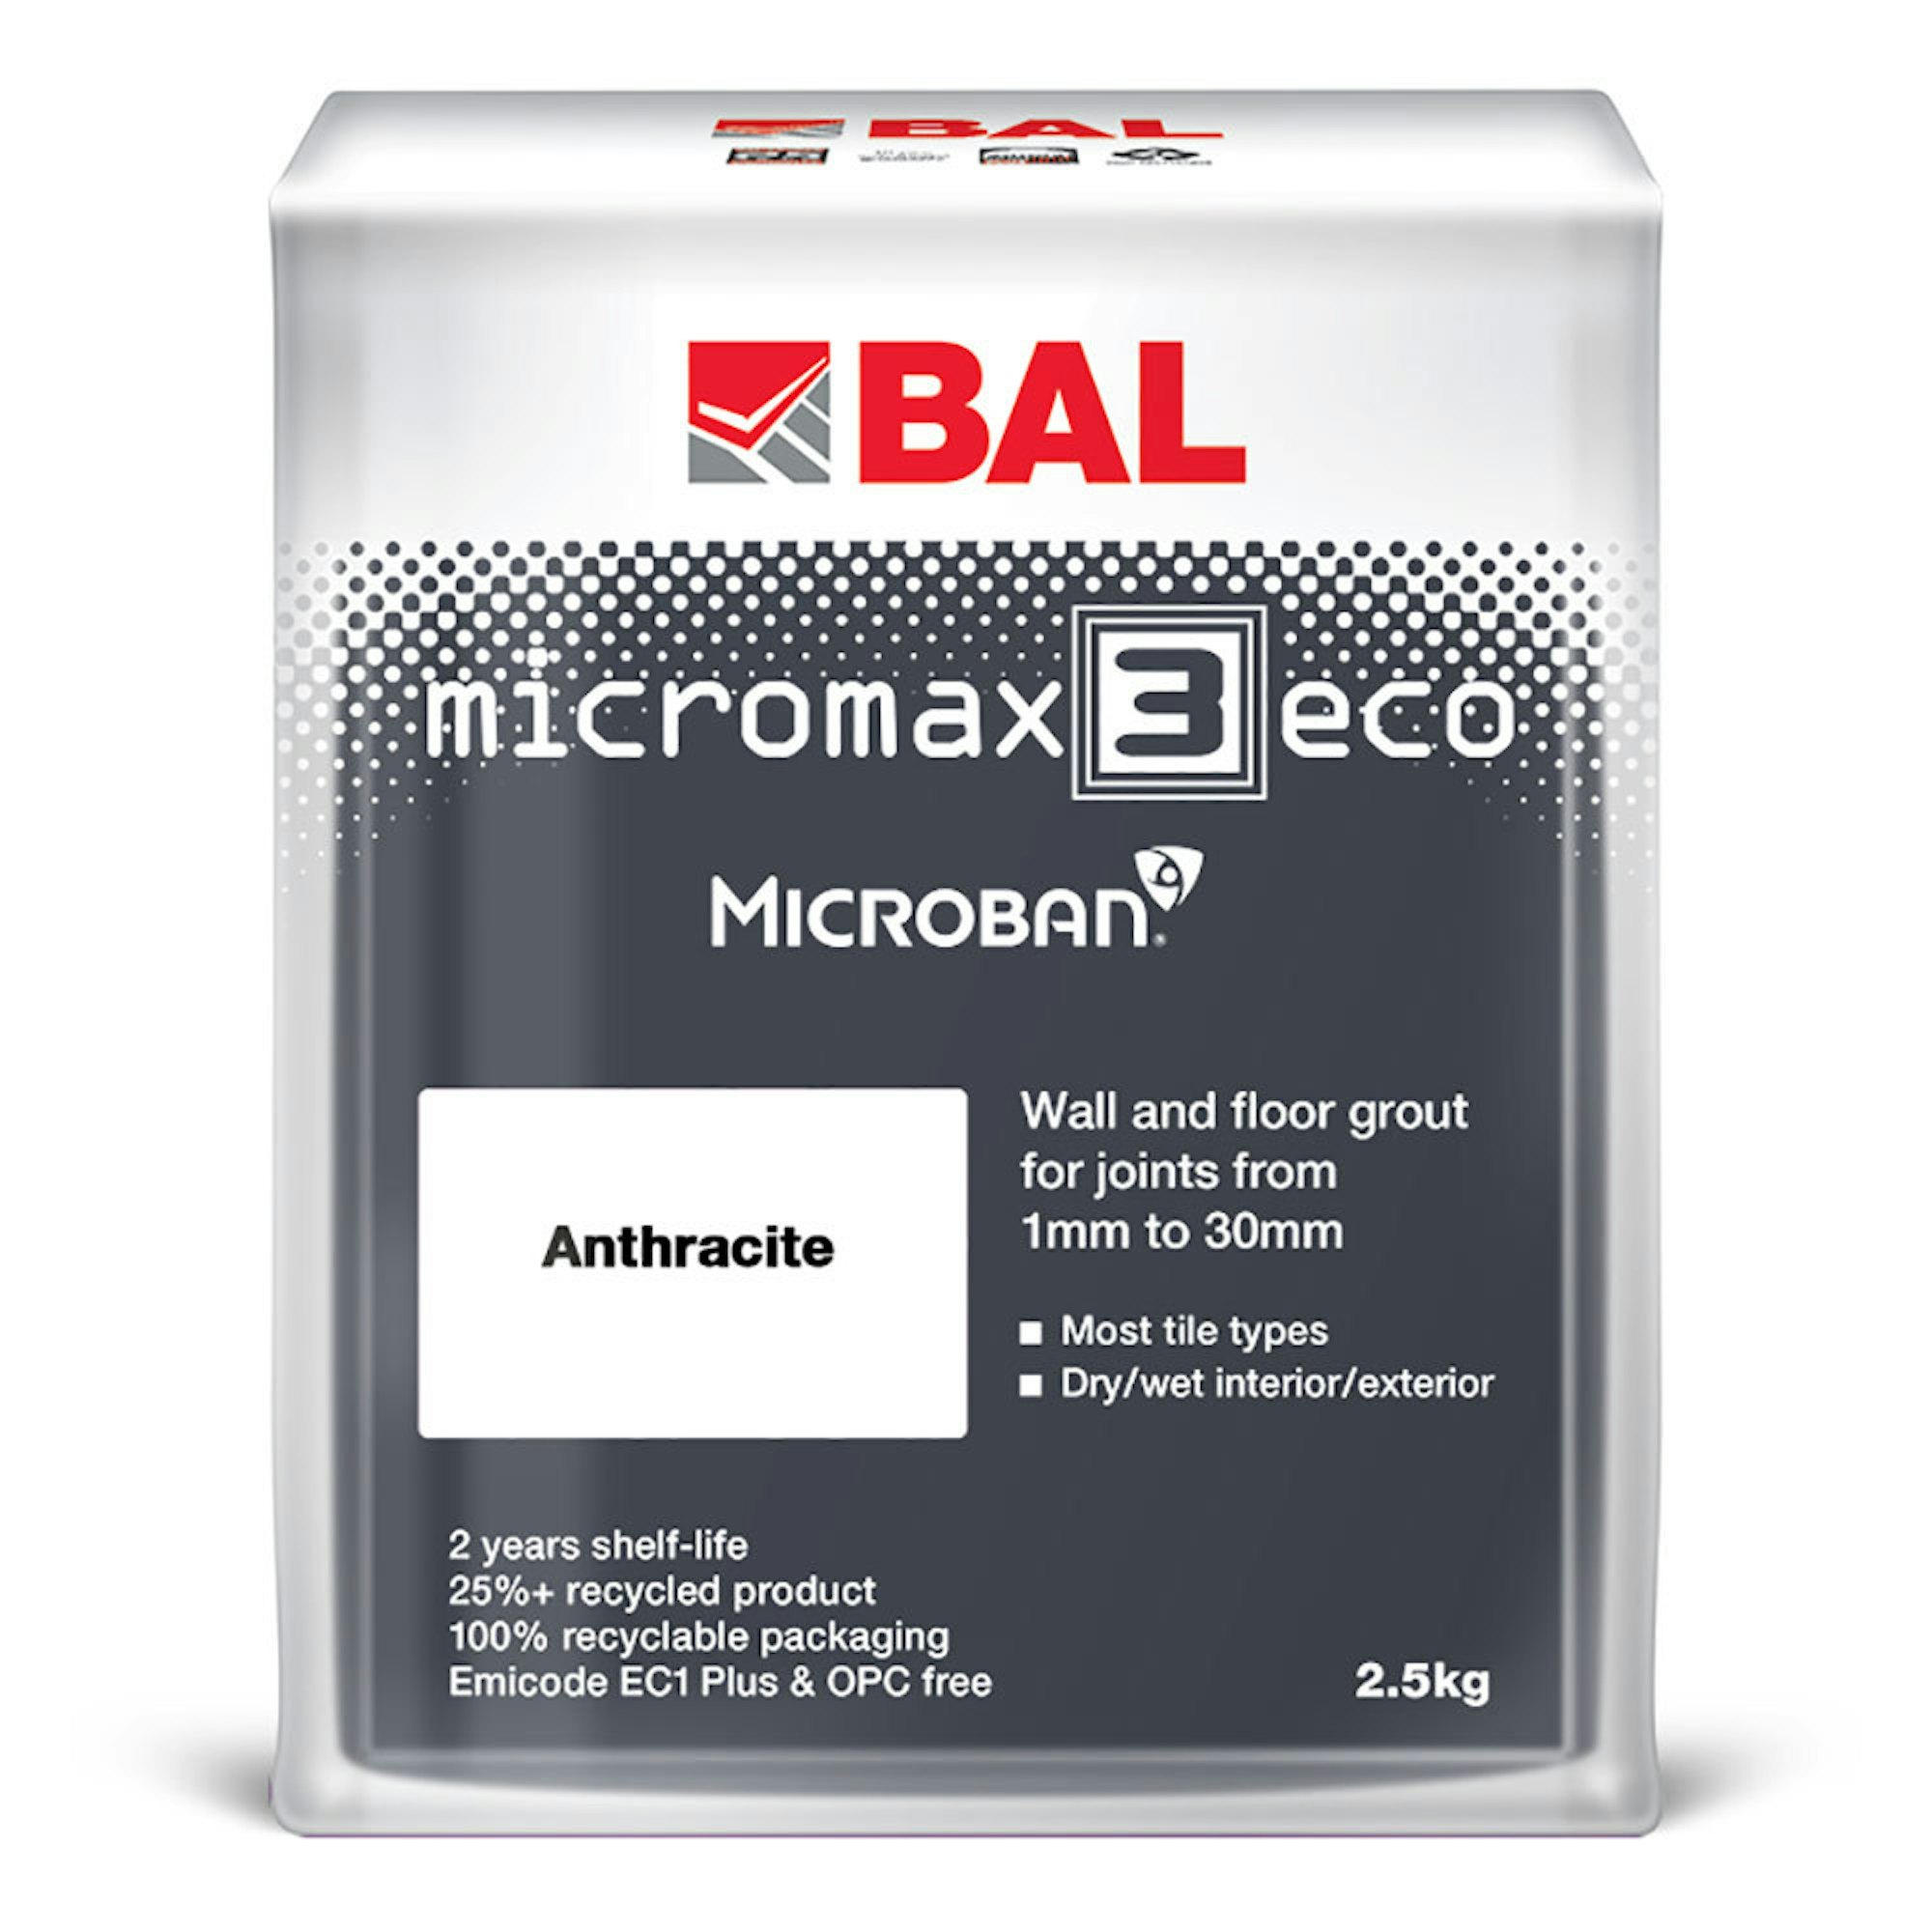 2.5kg BAL Micromax 3 Eco Anthracite Grout